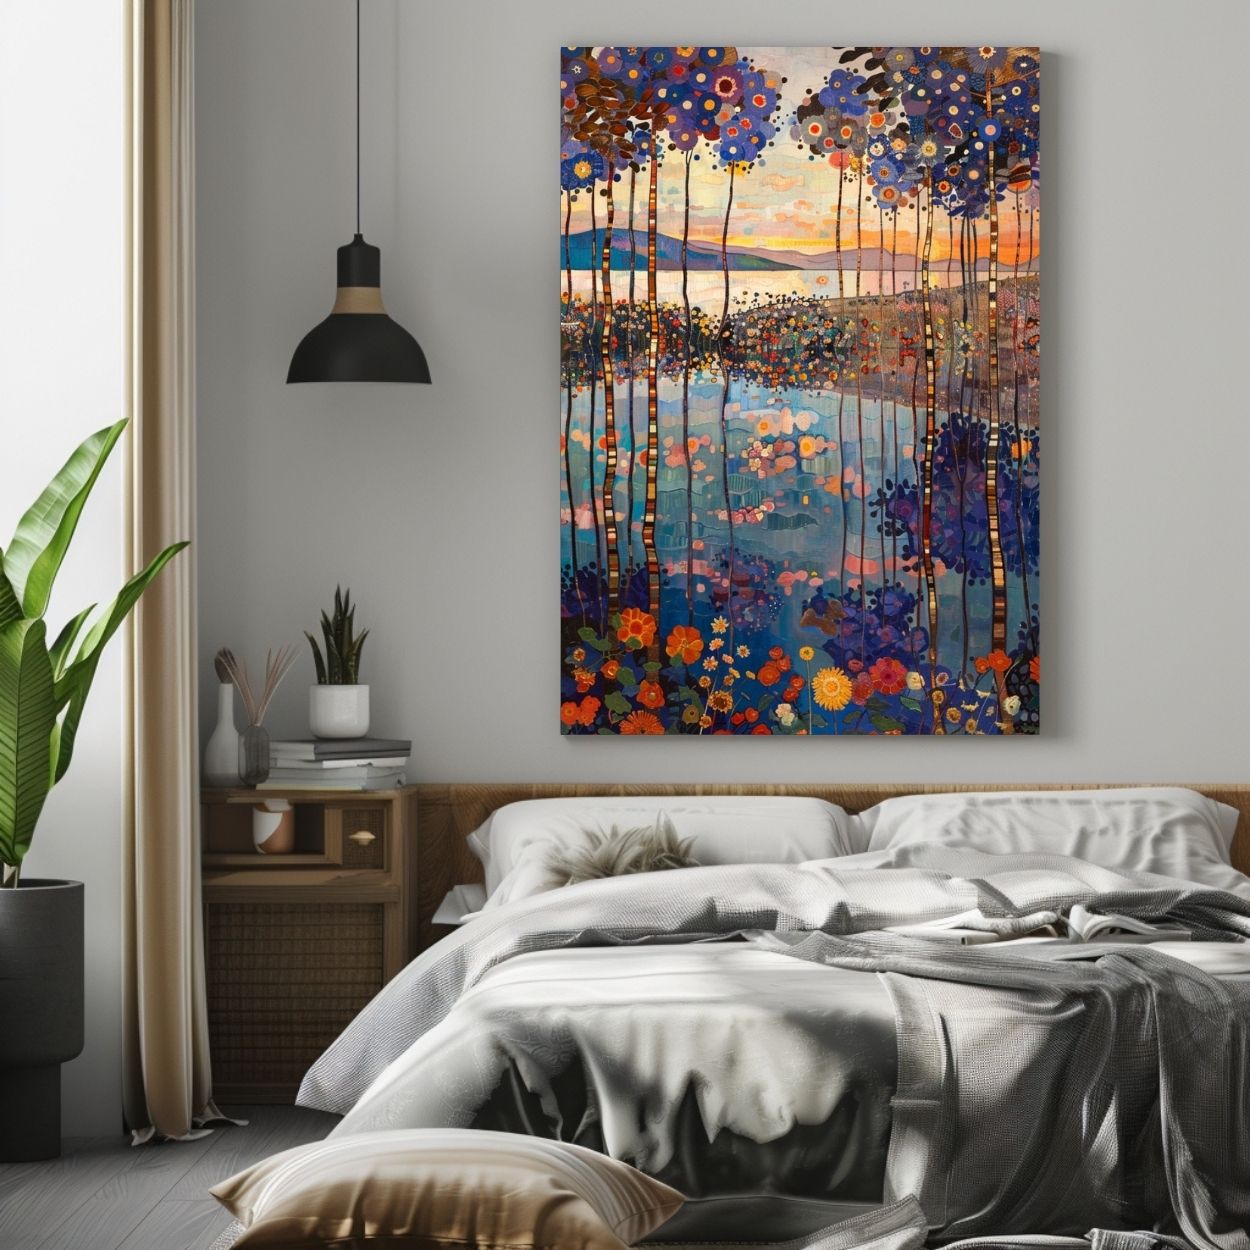 Product image showing canvas wall art of Verdant Echo - Forest and Lake in Intense Colors in a bedroom.